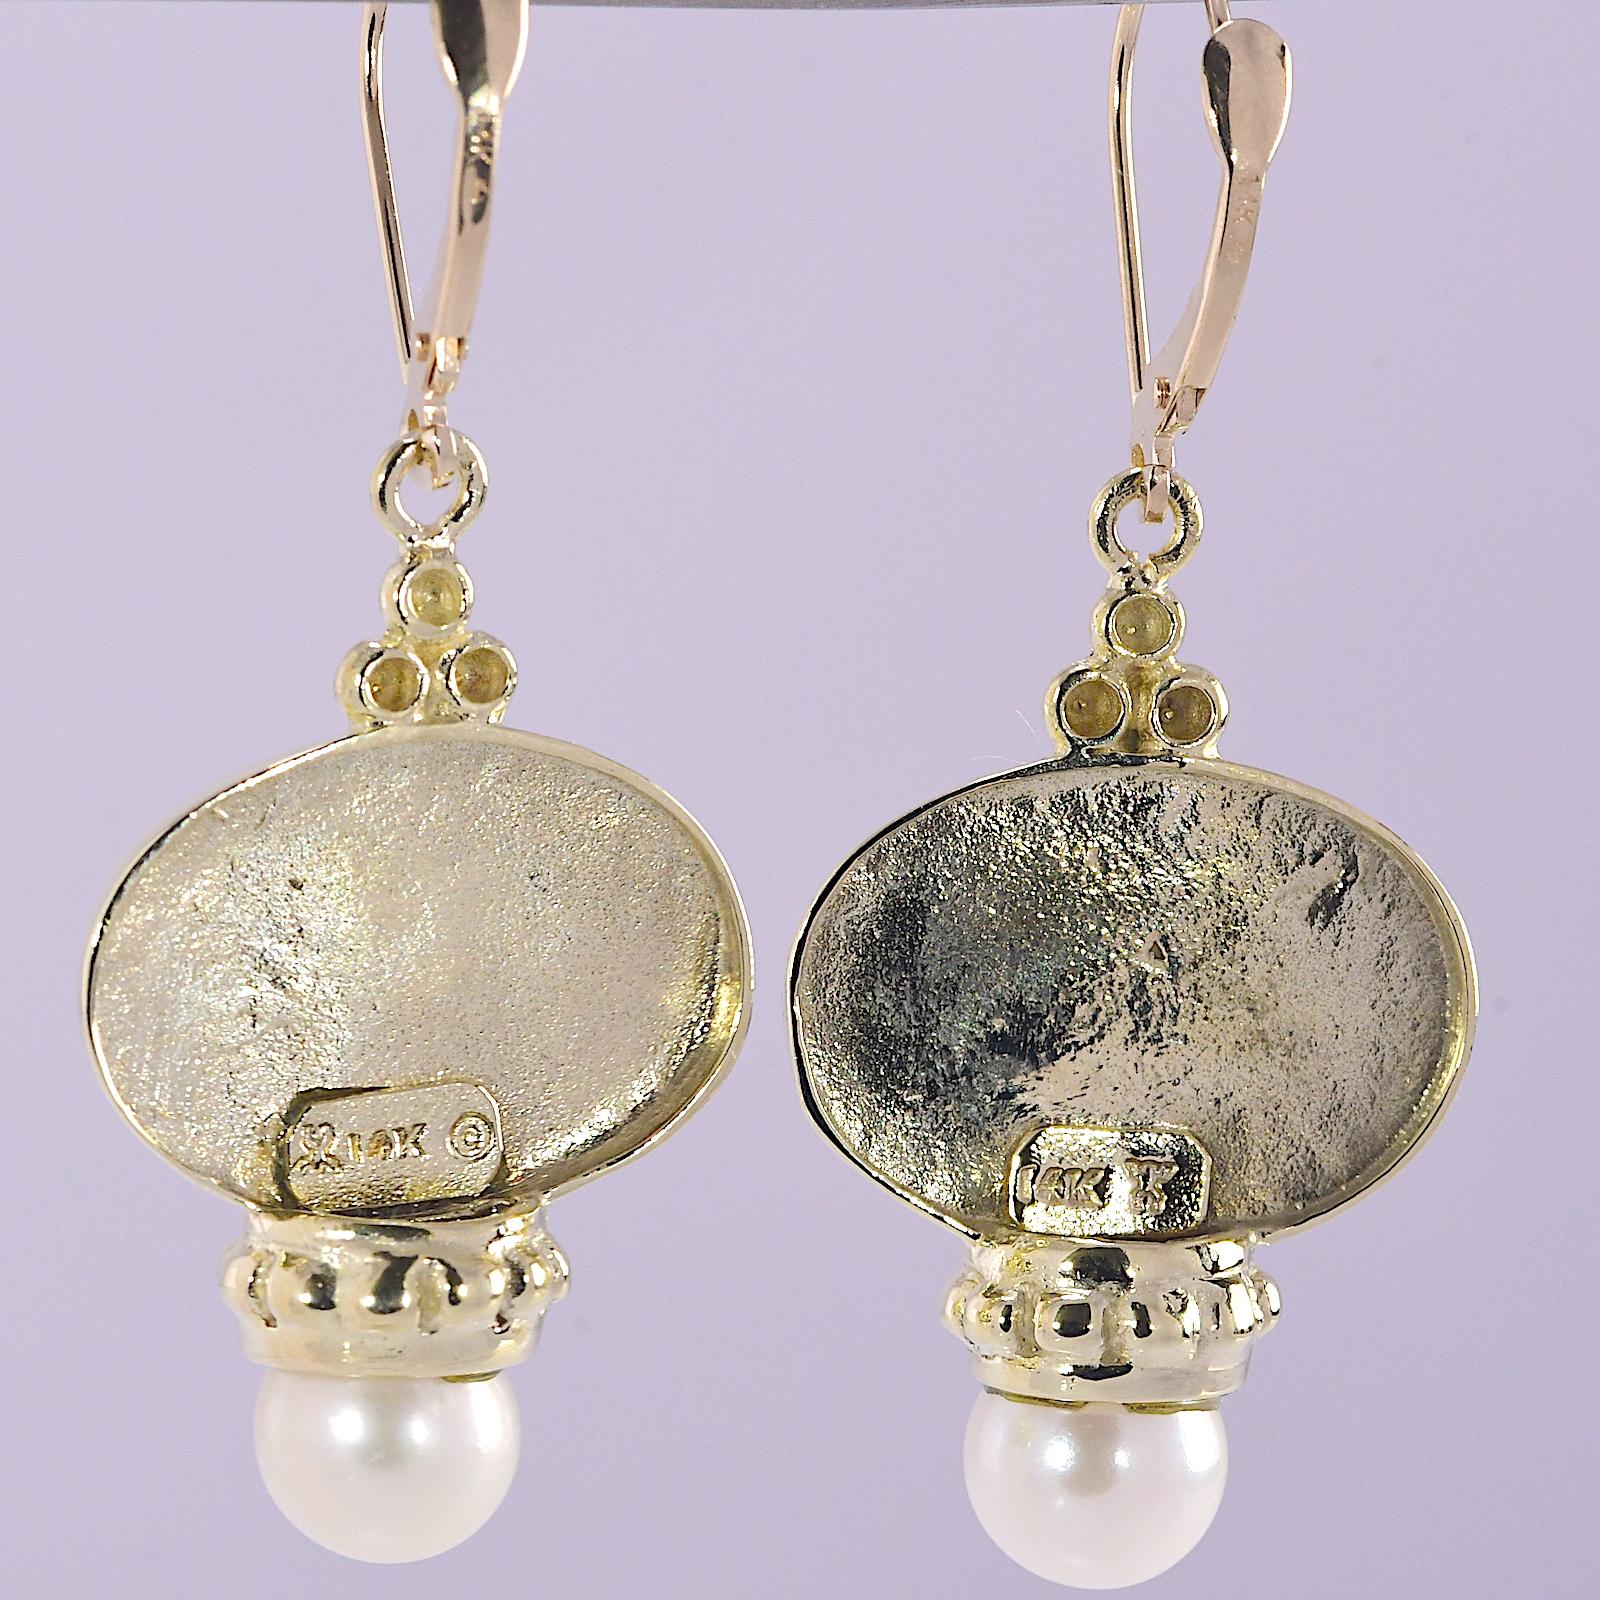 Natural Freshwater Pearl Earrings Yellow Gold 14K Pegasus Motif 

Stones: Natural Freshwater Pearl 
Metal: Yellow Gold 
Purity: 14K 
Style: Pegasus Motif Earrings 
Total Gram Weight: 9.80

JESSUP'S PRICE: $699.00

163252-1
Unique Pegasus Motif!